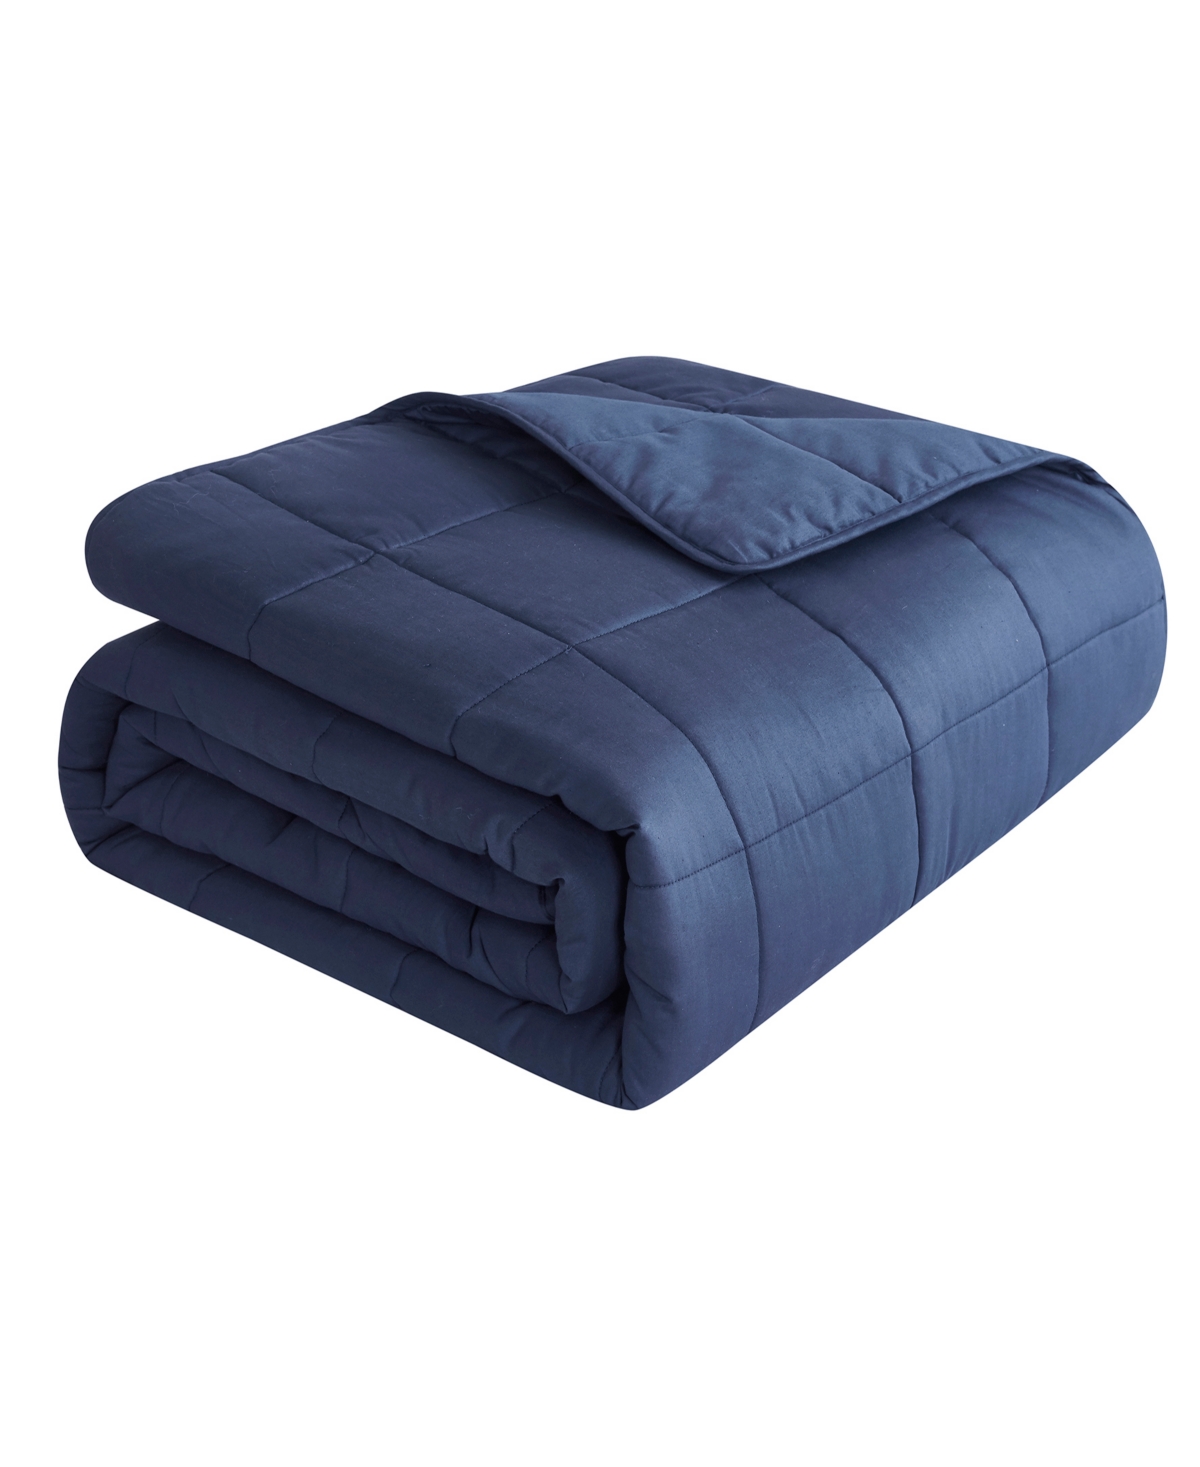 Dream Theory Cotton Weighted 12 Lbs Blanket, Twin Bedding In Navy